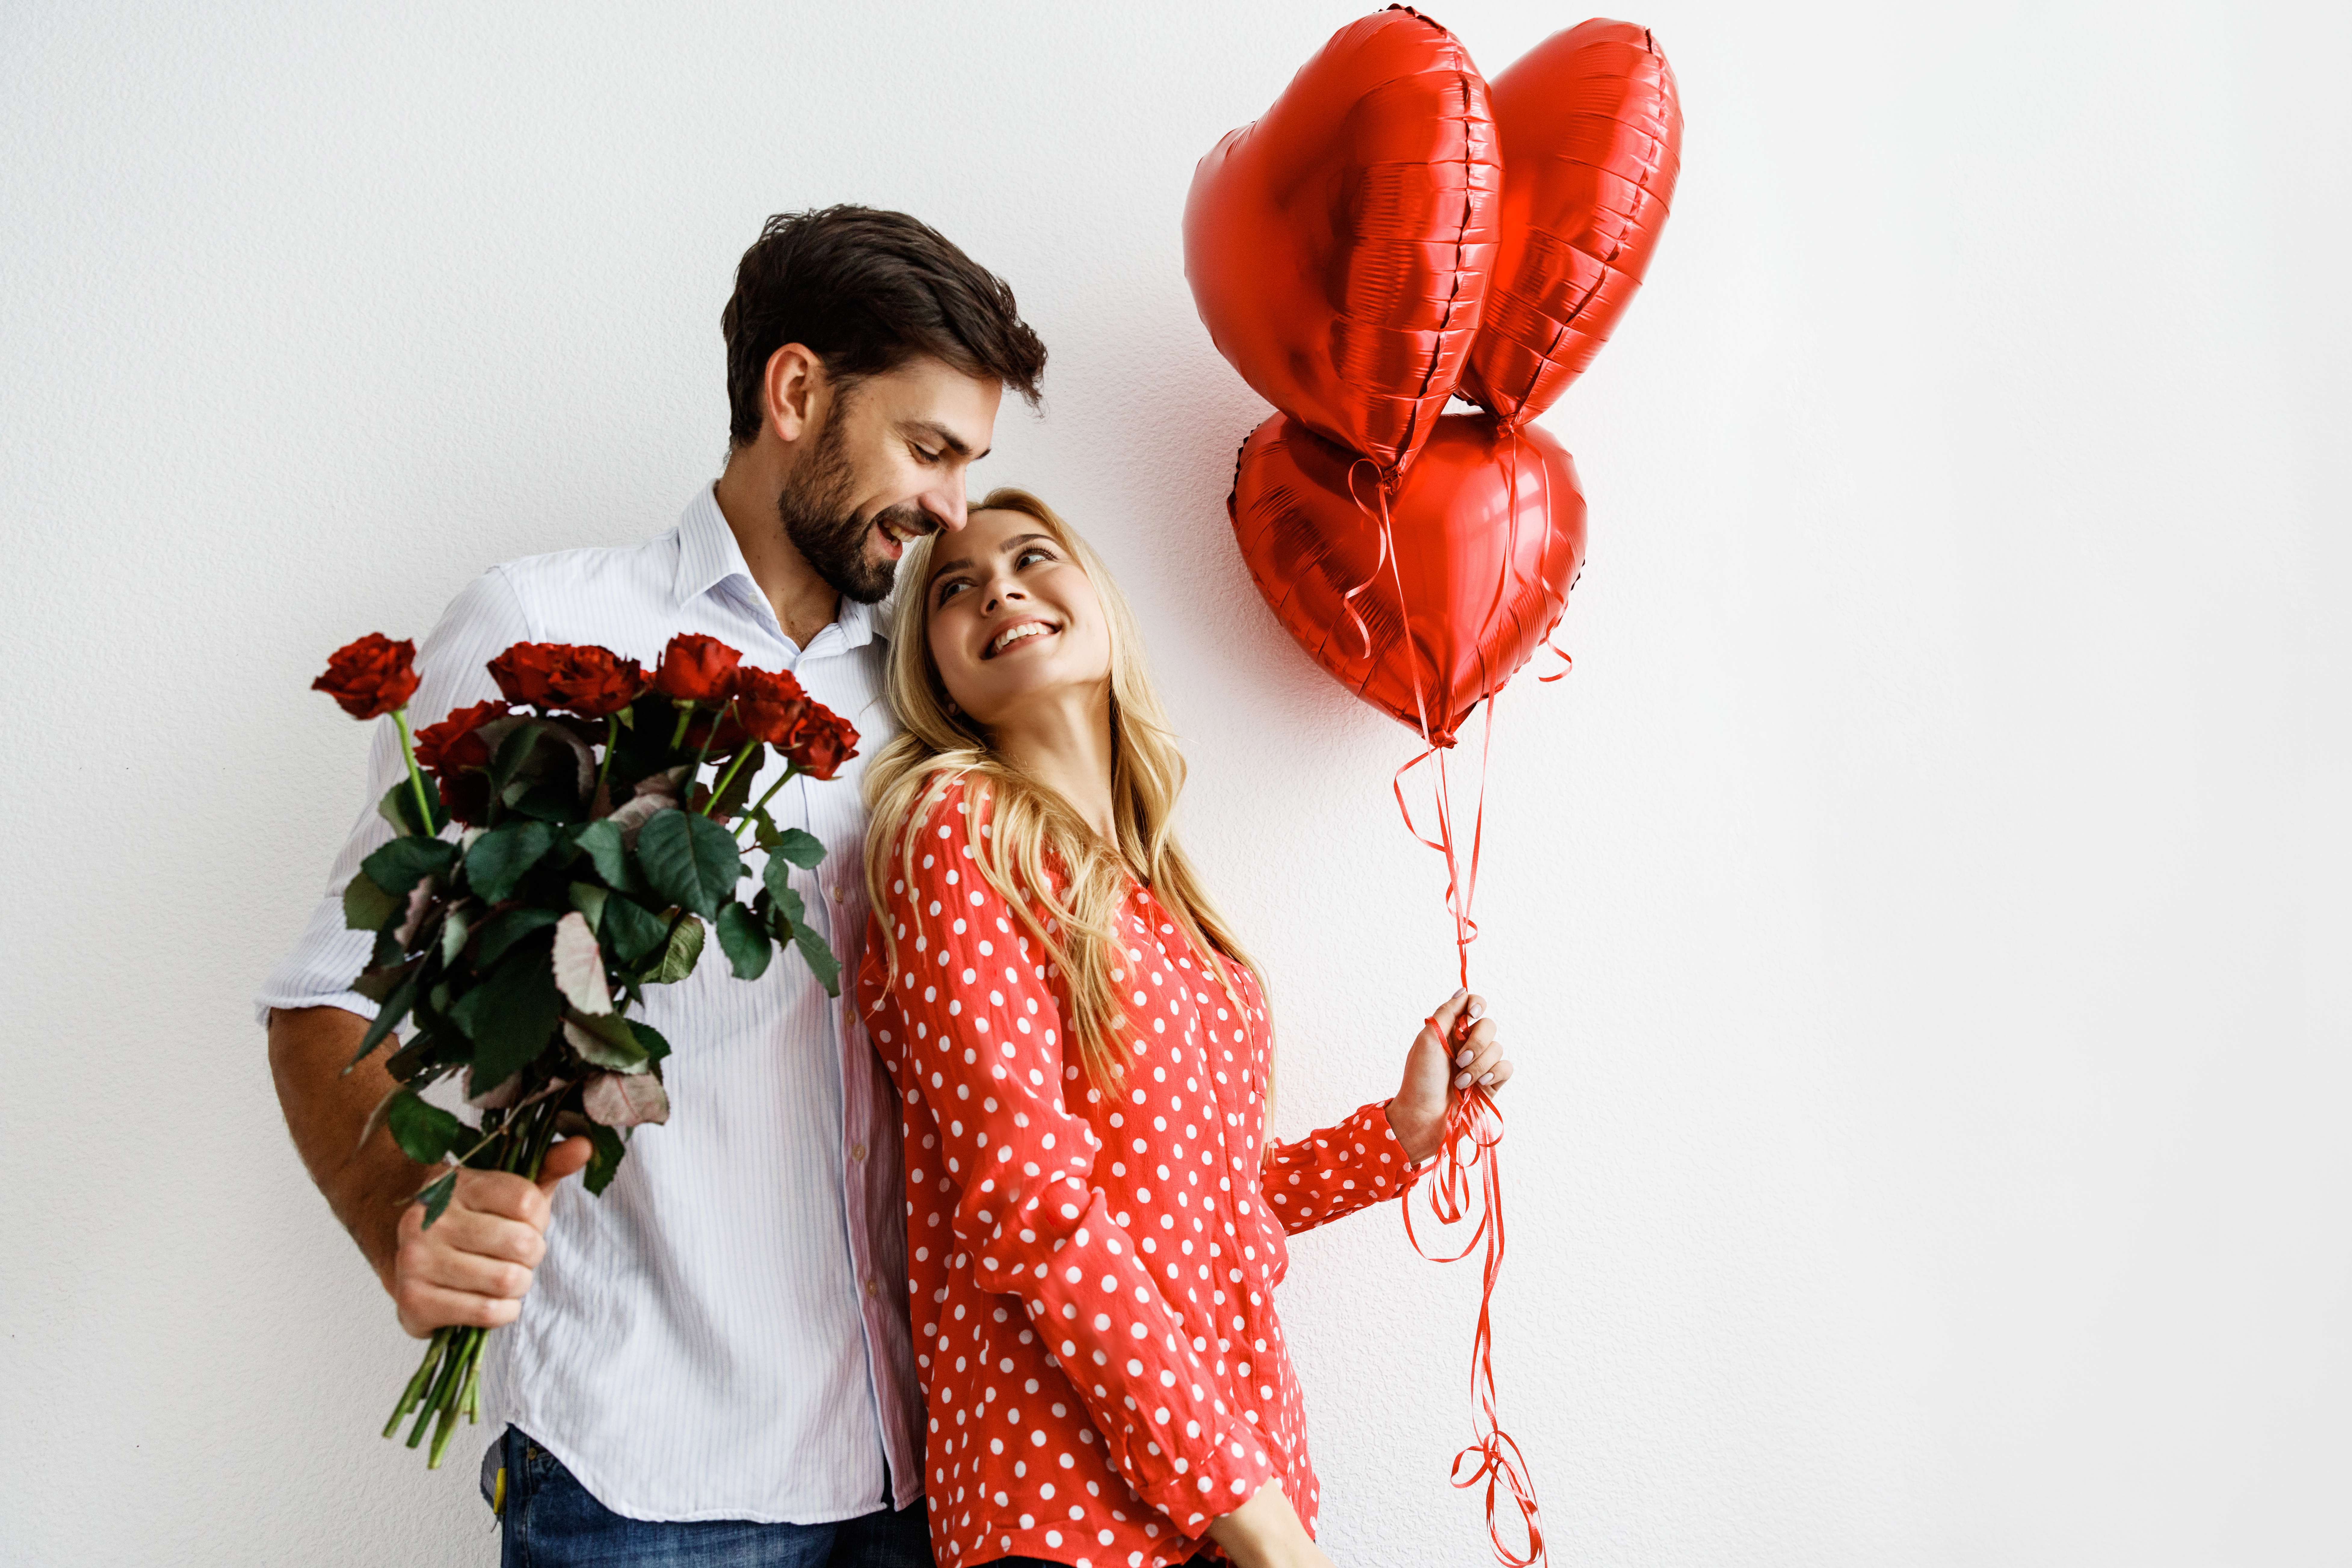 Rekindling Connection: Simple Daily Practices to Attune as a Couple this Valentine's Day